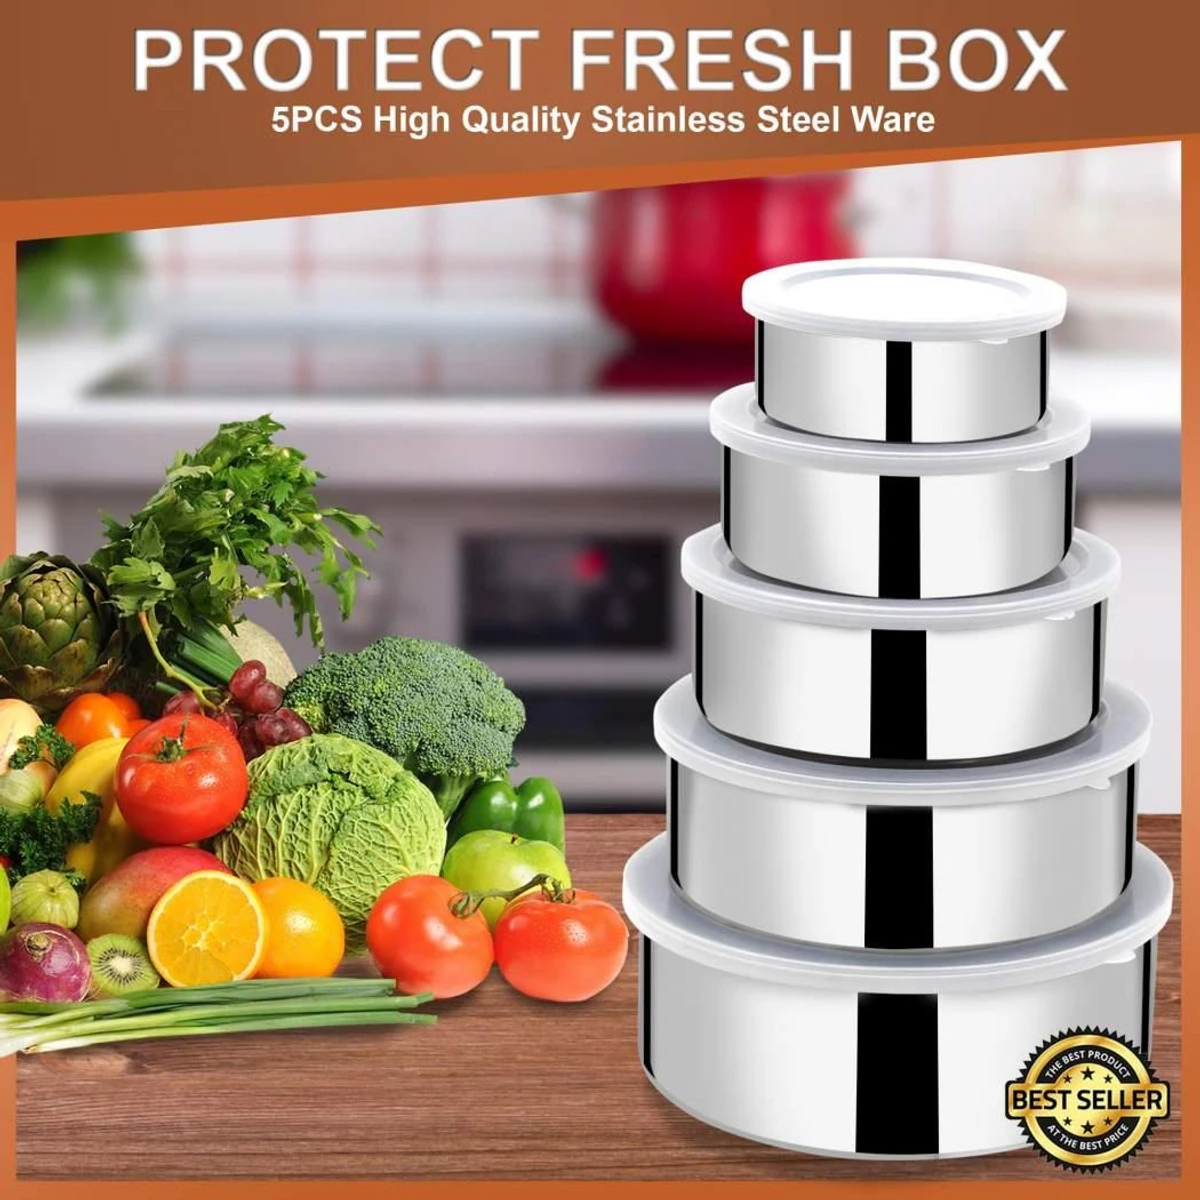 5 Pcs Multifunctional Stainless Steel Protect Fresh Box With Lid